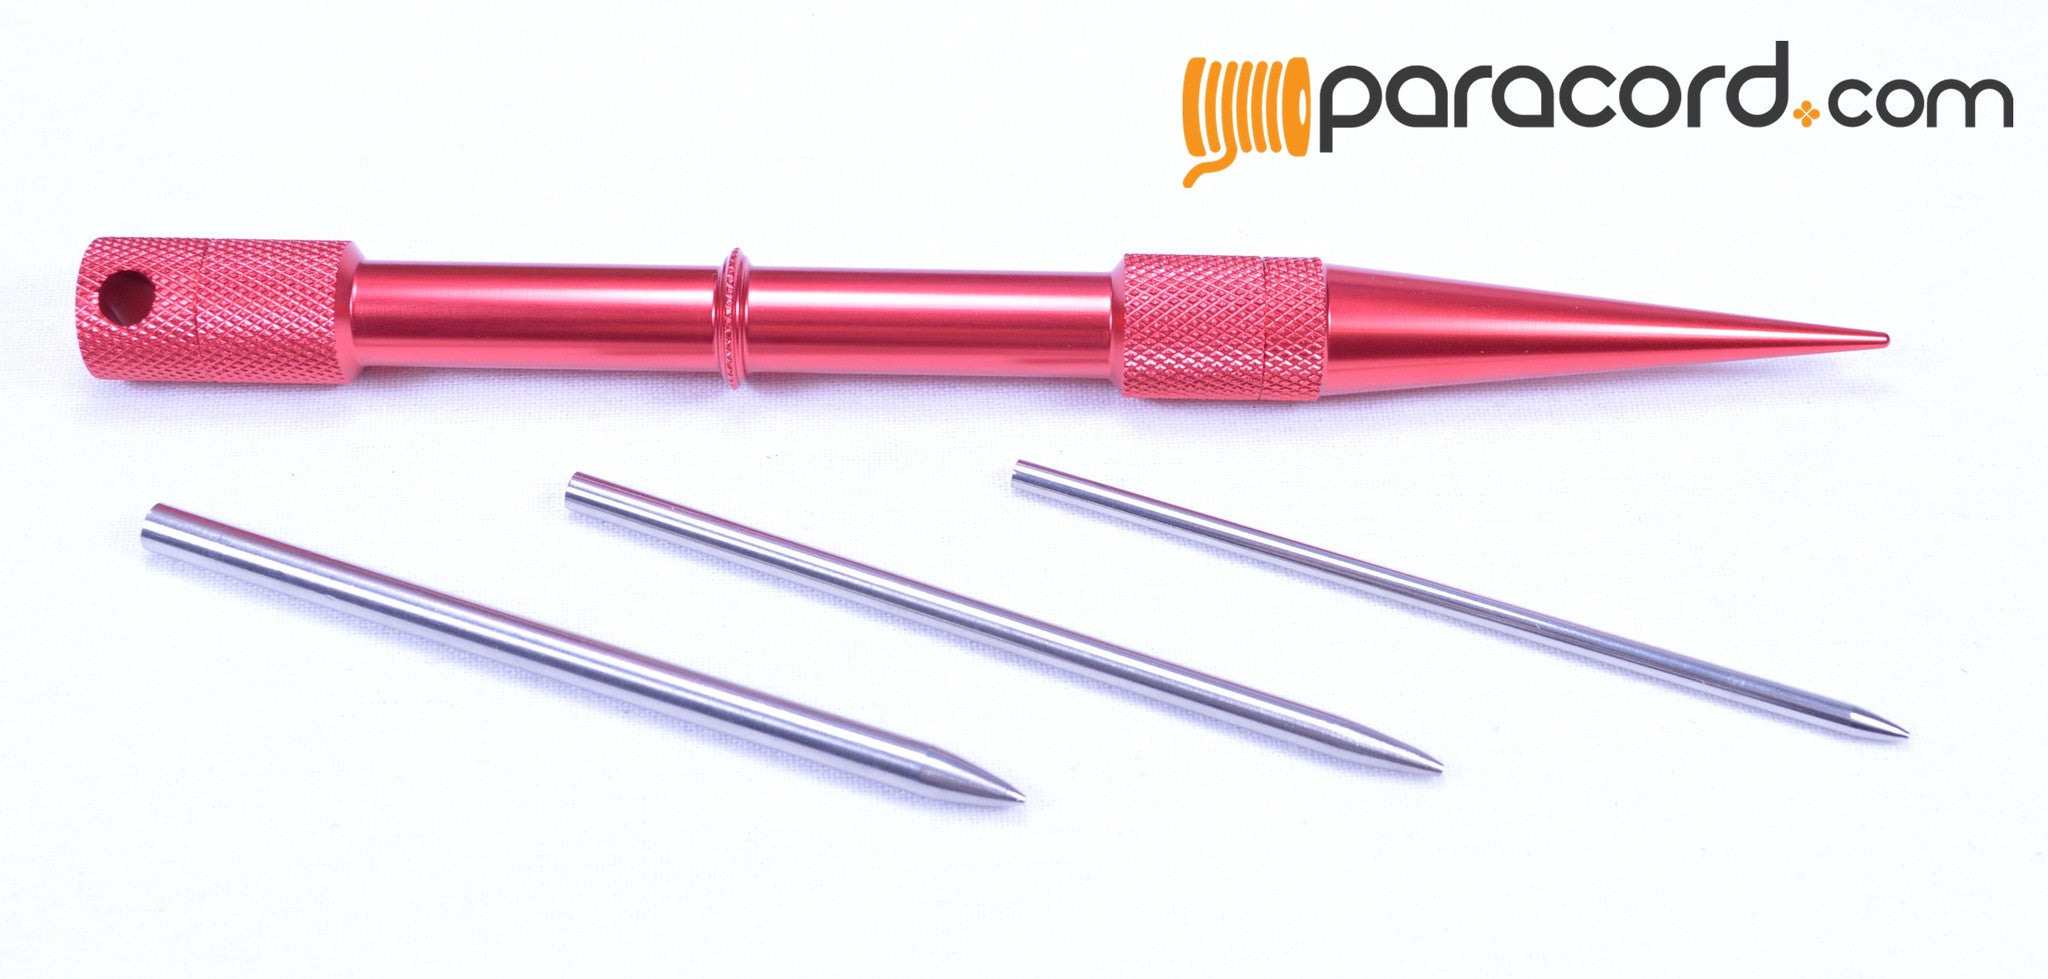 3pc. Paracord Needle (Fid) Set - Red